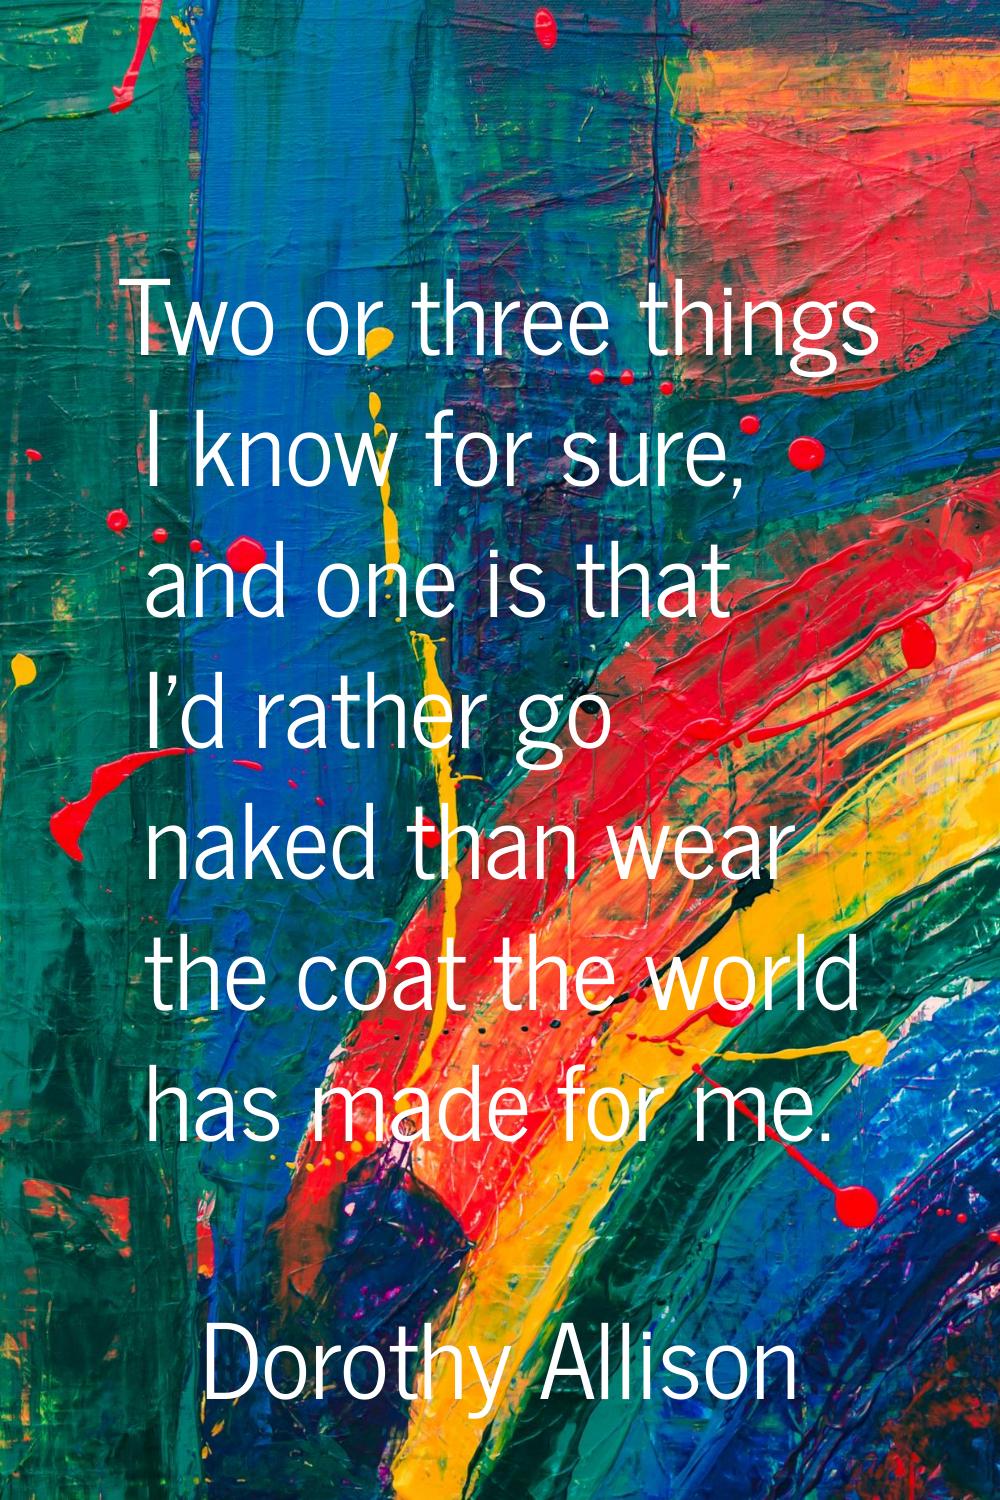 Two or three things I know for sure, and one is that I'd rather go naked than wear the coat the wor